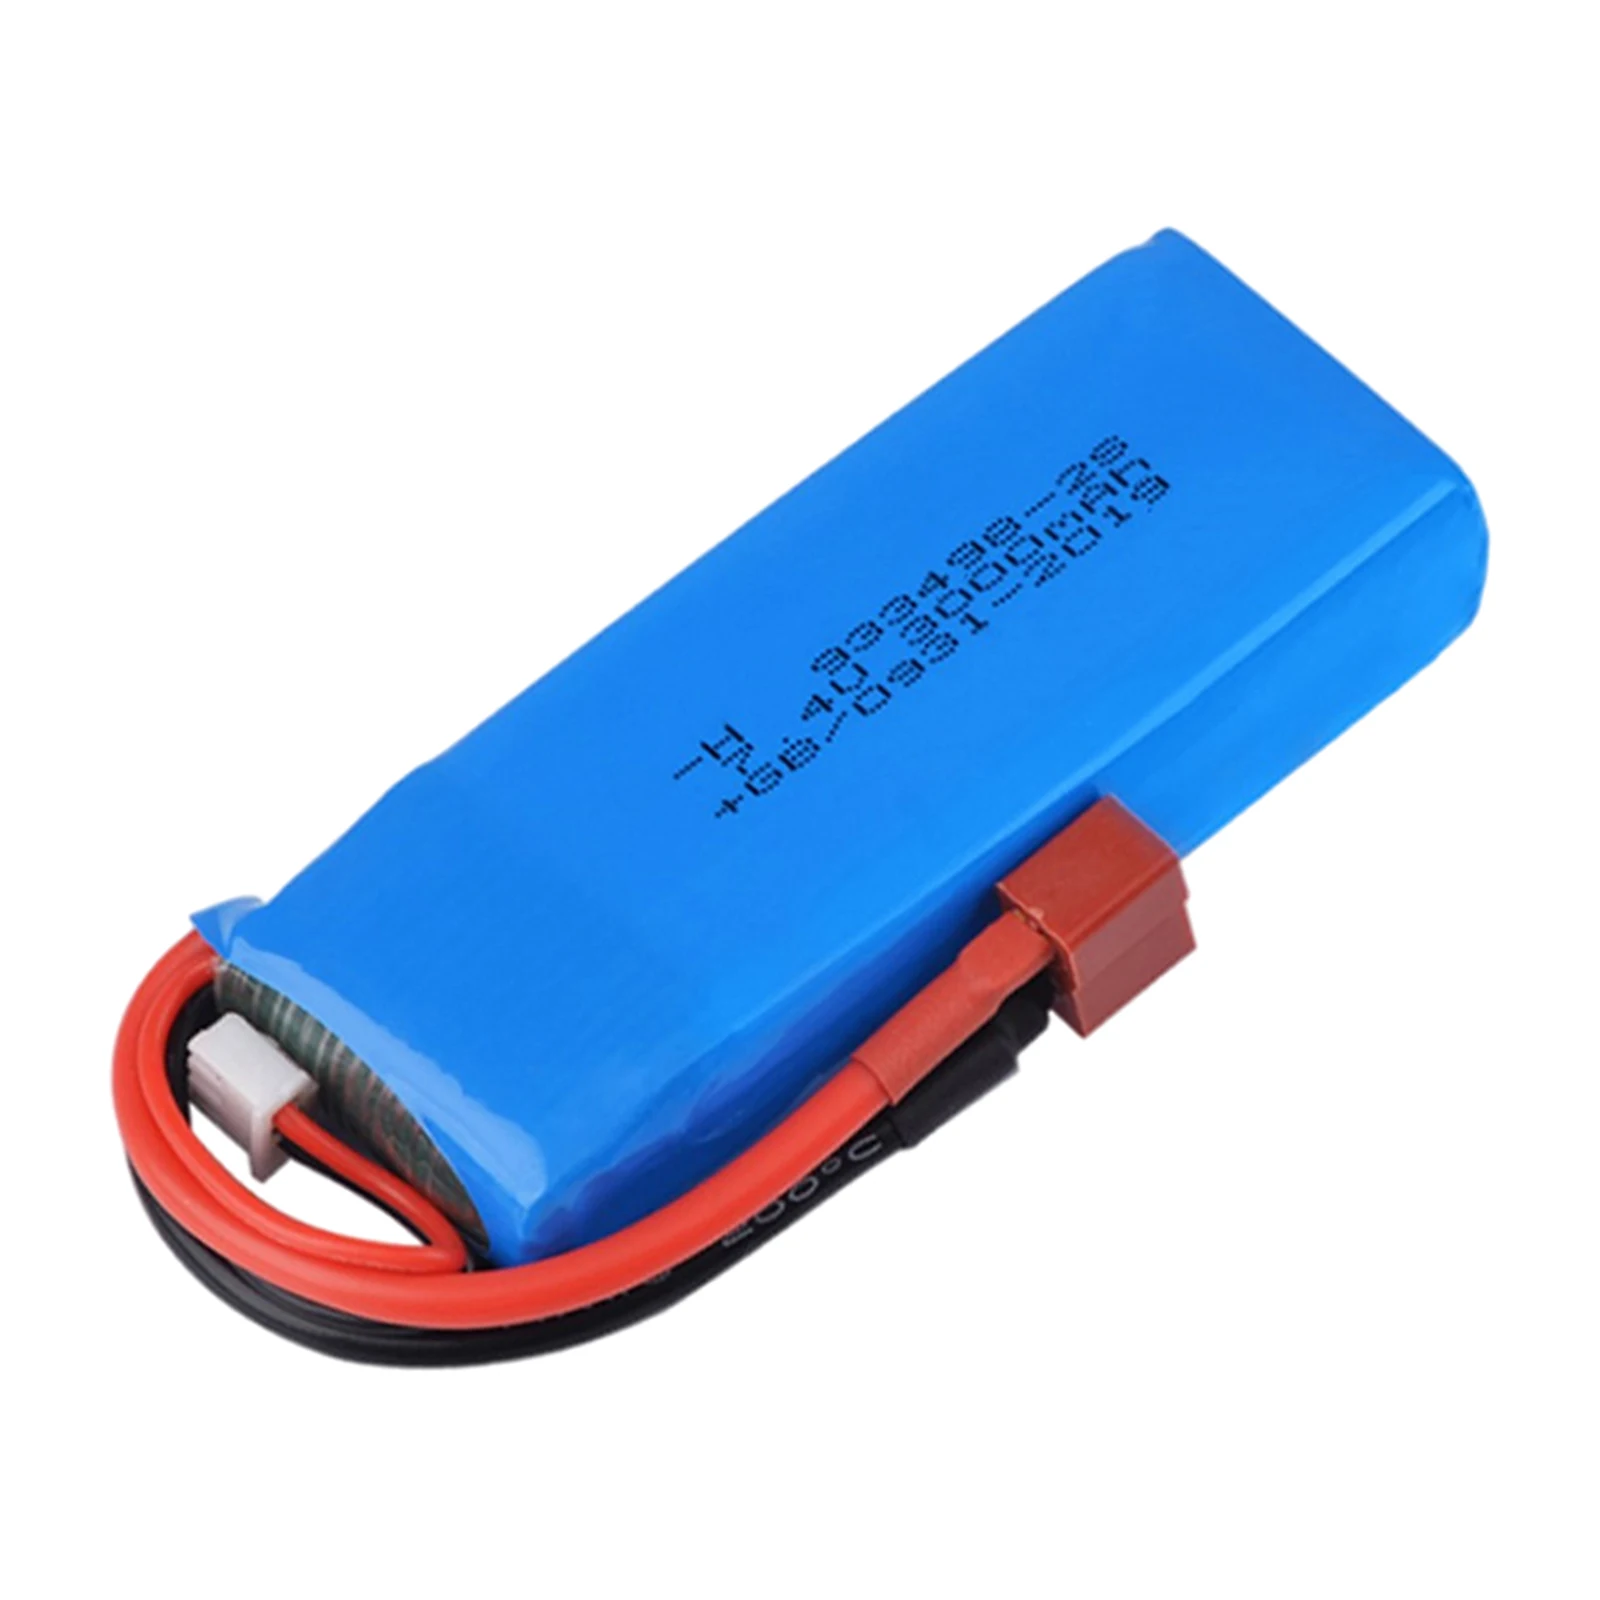 Rechargeable 2S 7.4V 3000mAh Lithium Polymer Batteries for WLTOYS XKS 144001 1240181 Remote Control RC Model Car